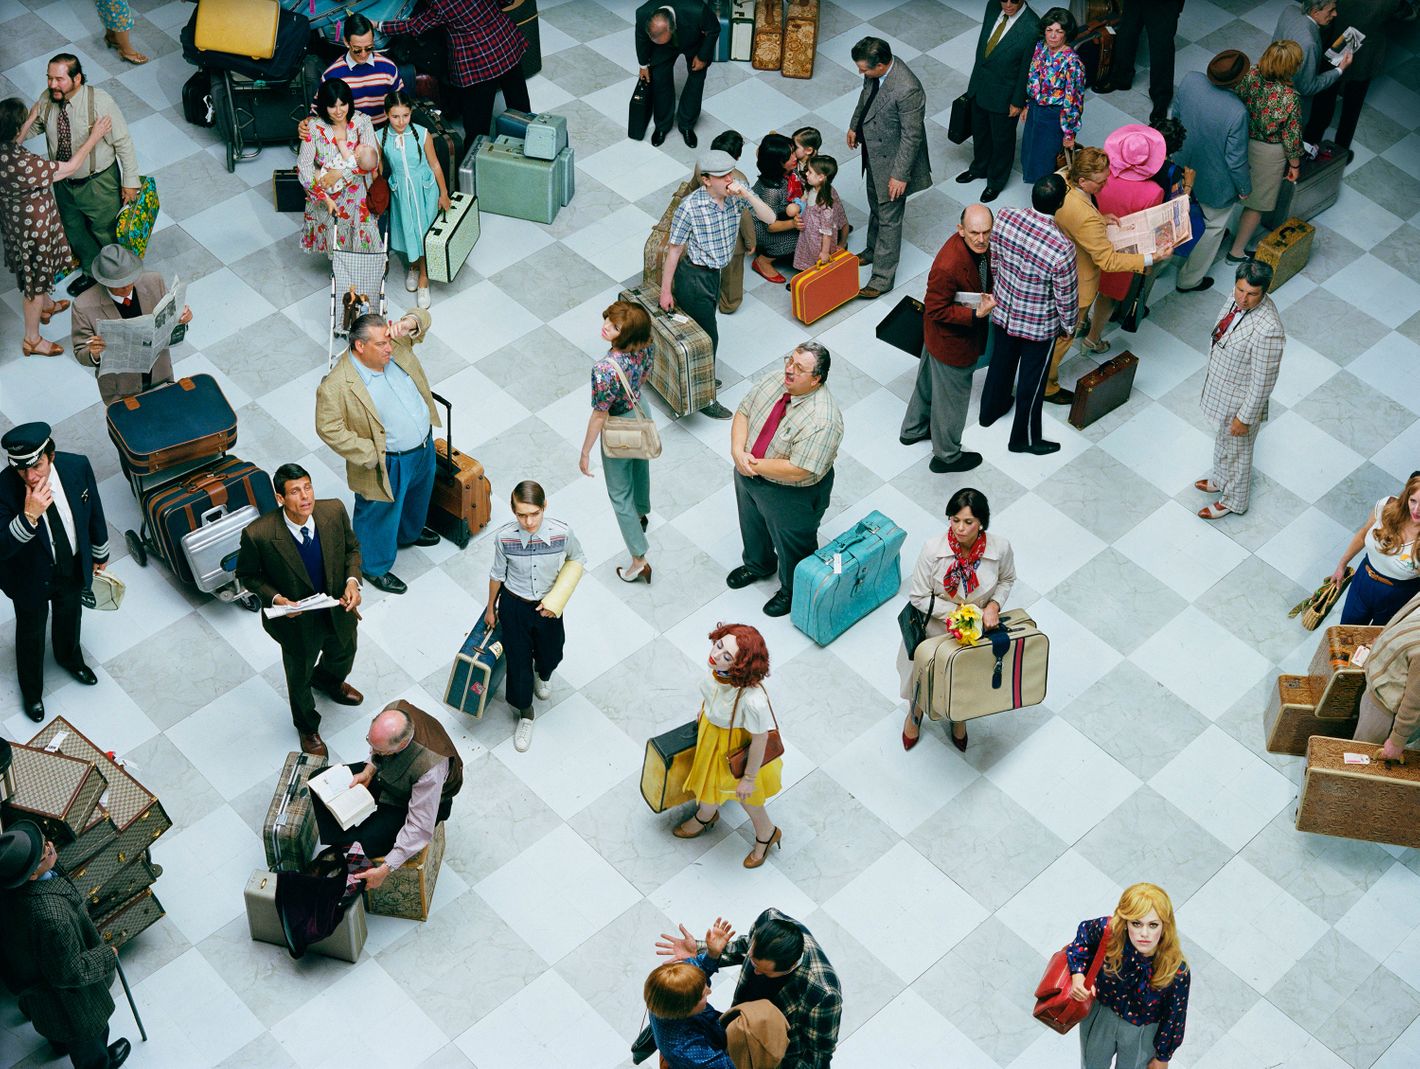 See: Alex Prager's Lonely, Haunting Face in the Crowd